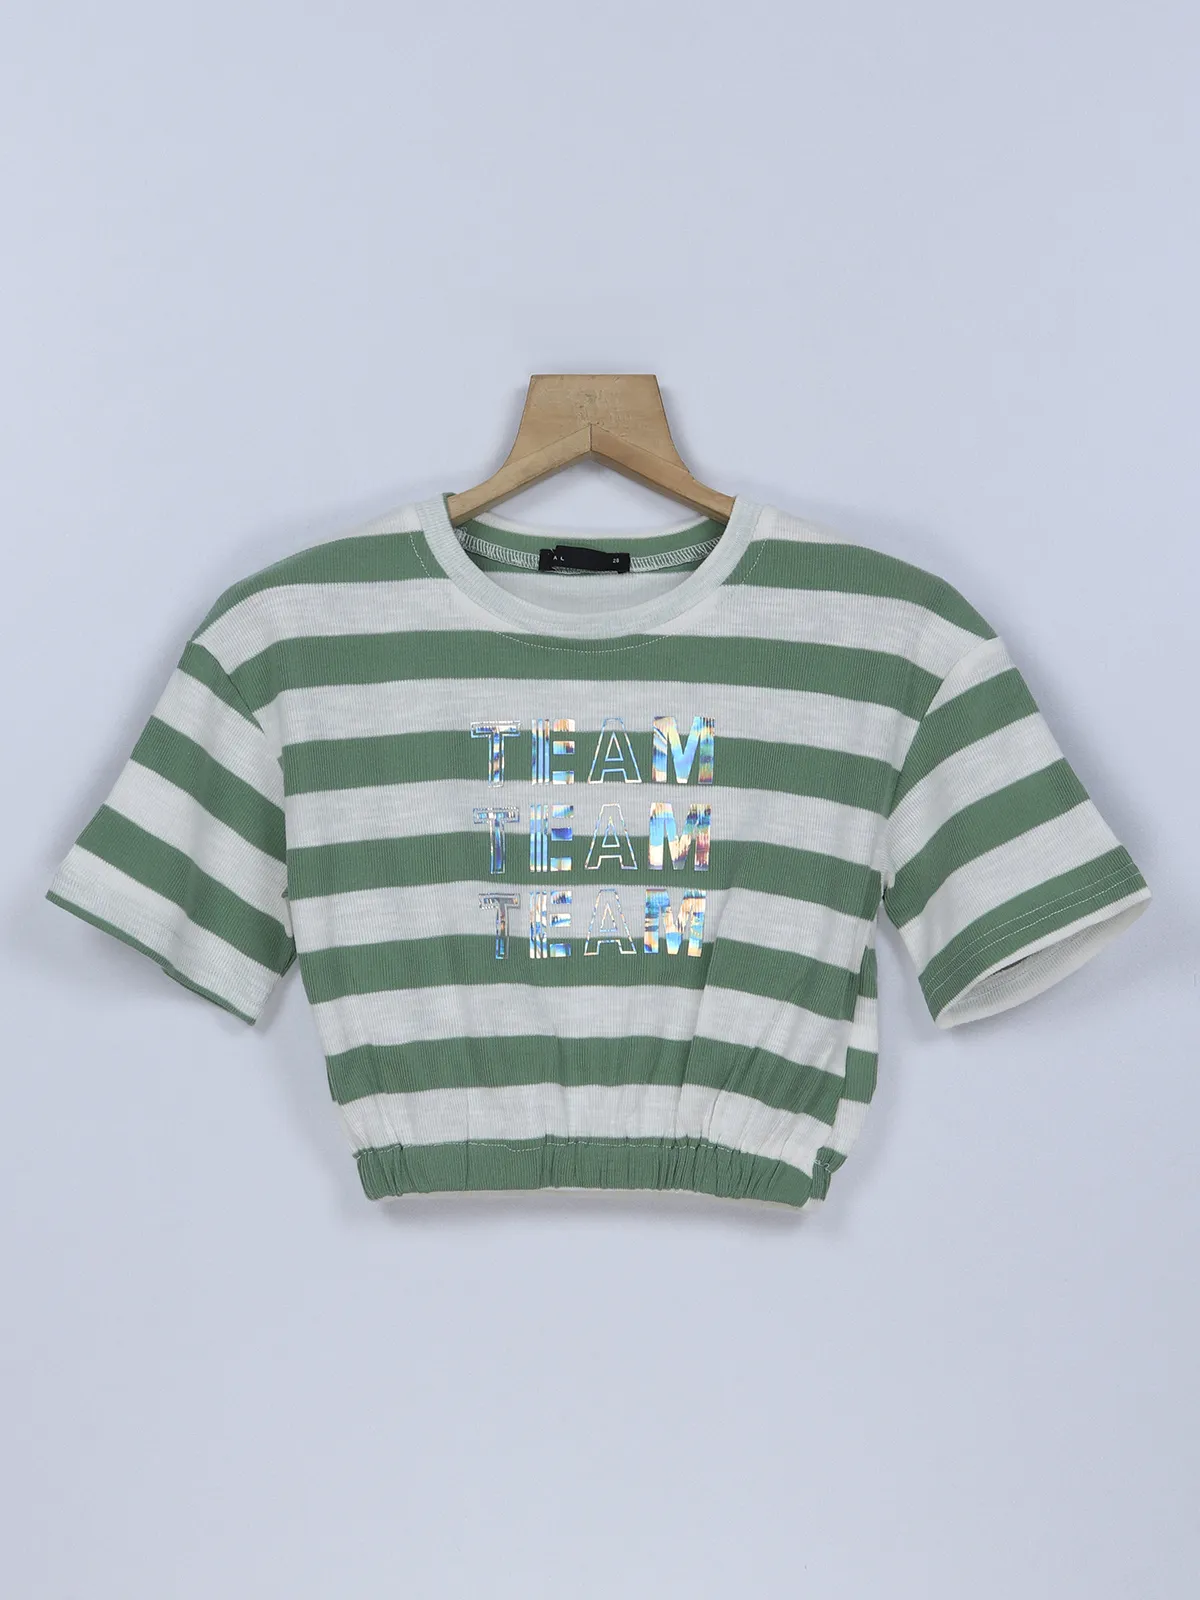 Deal stripe green knitted top